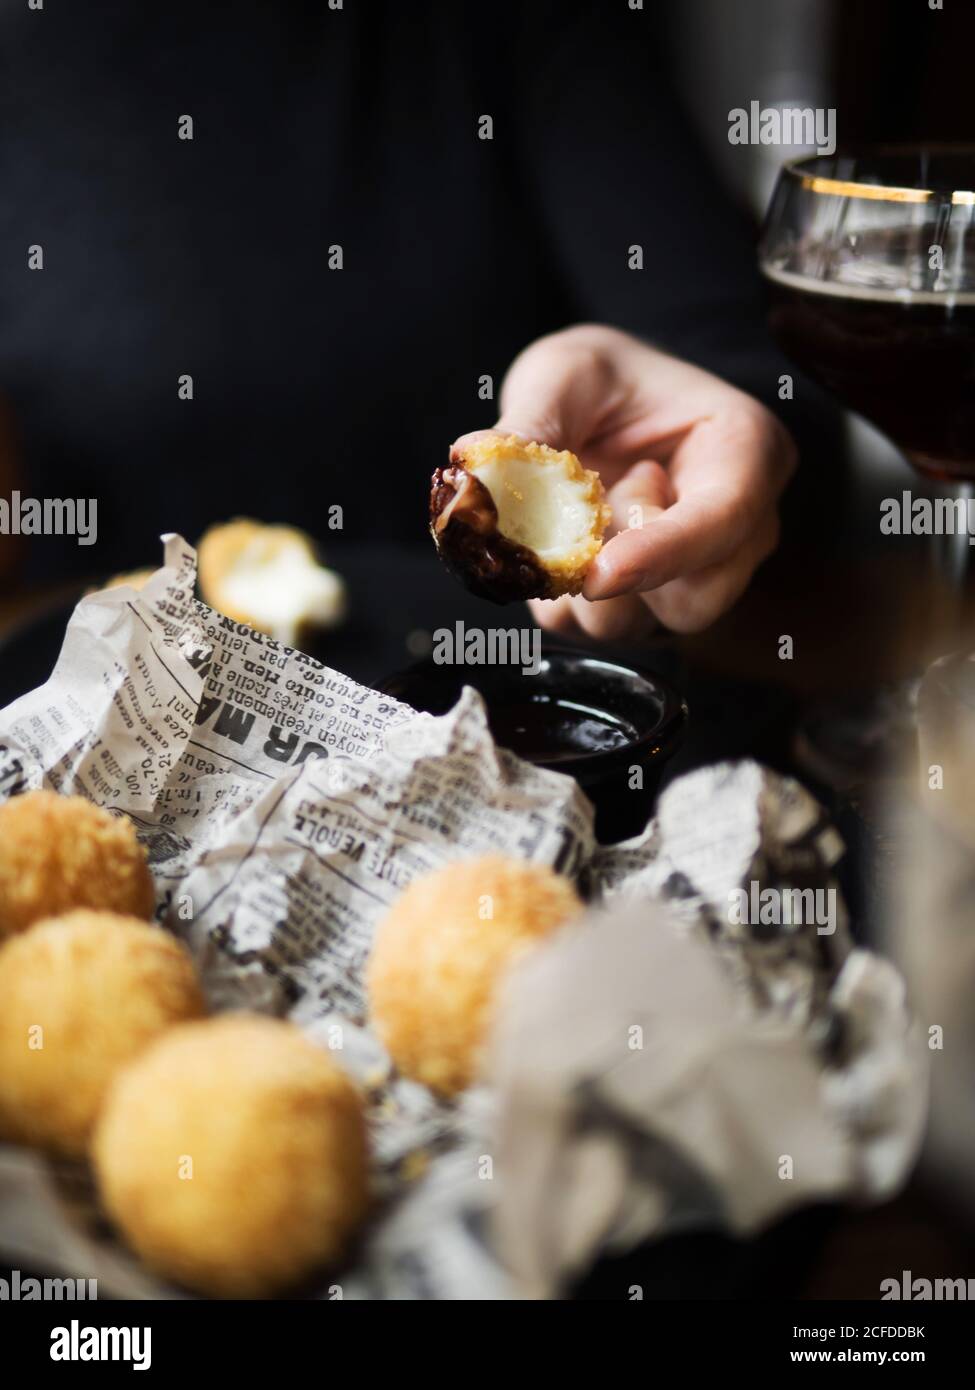 Crop unrecognizable female holding delicious cheese ball with mozzarella filling while sitting at table in cafe Stock Photo